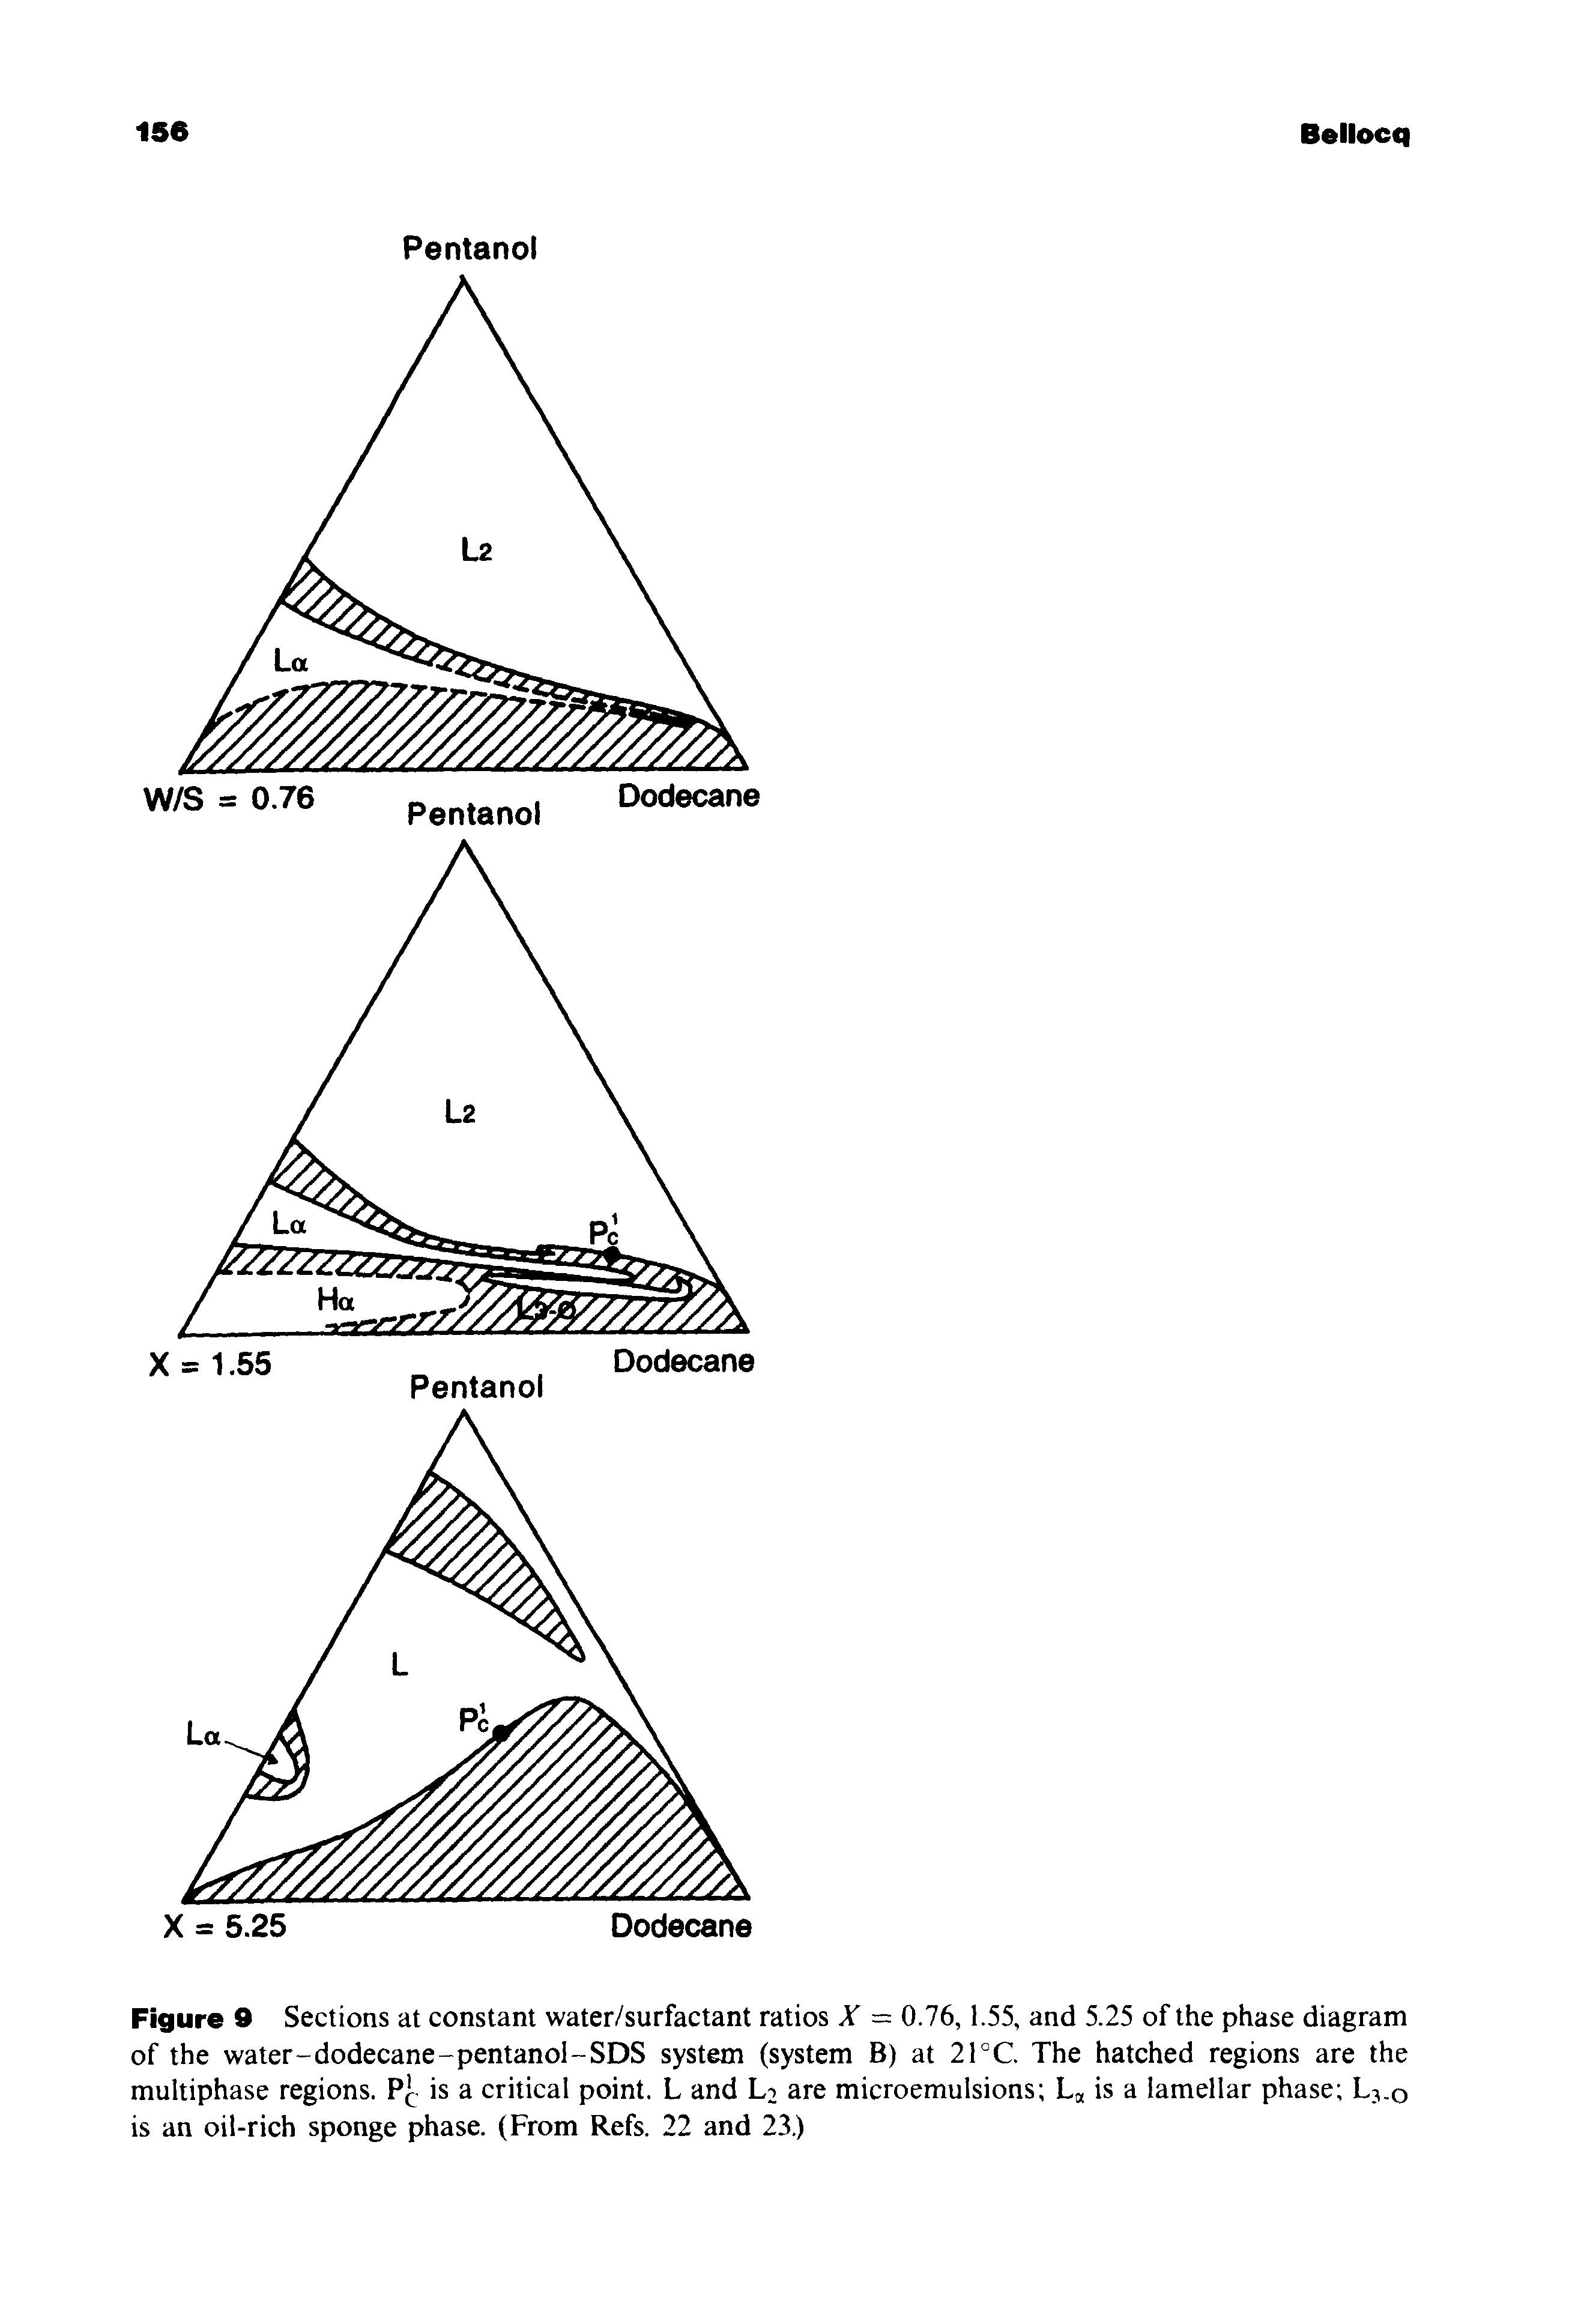 Figure 9 Sections at constant water/surfactant ratios X = 0.76,1.55, and 5.25 of the phase diagram of the water-dodecane-pentanol-SDS system (system B) at 21°C The hatched regions are the multiphase regions. P[ is a critical point. L and Lt are microemulsions is a lamellar phase L3.0 is an oil-rich sponge phase. (From Refs. 22 and 23.)...